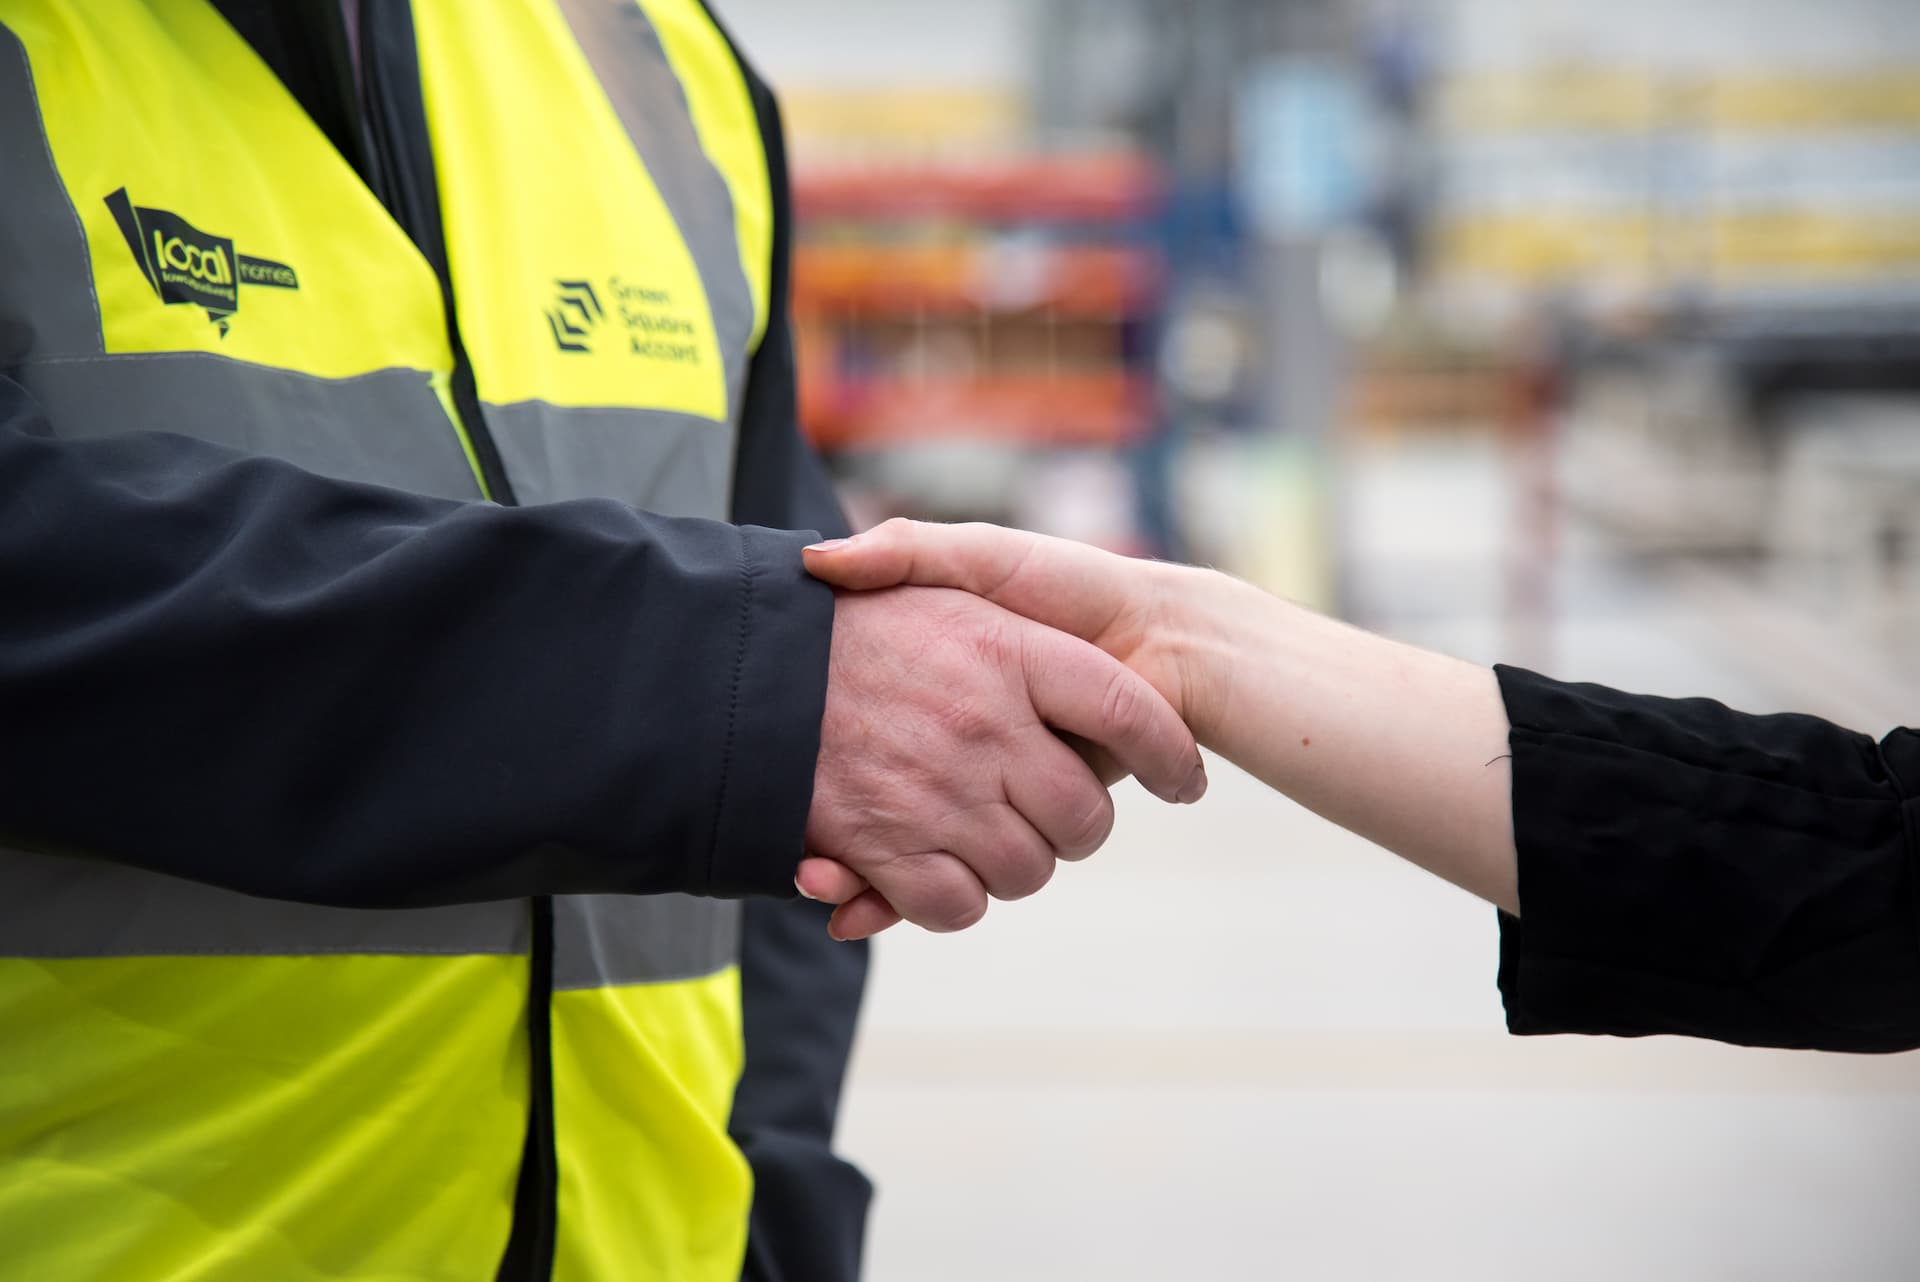 A LoCaL Homes employee shaking a partner's hand